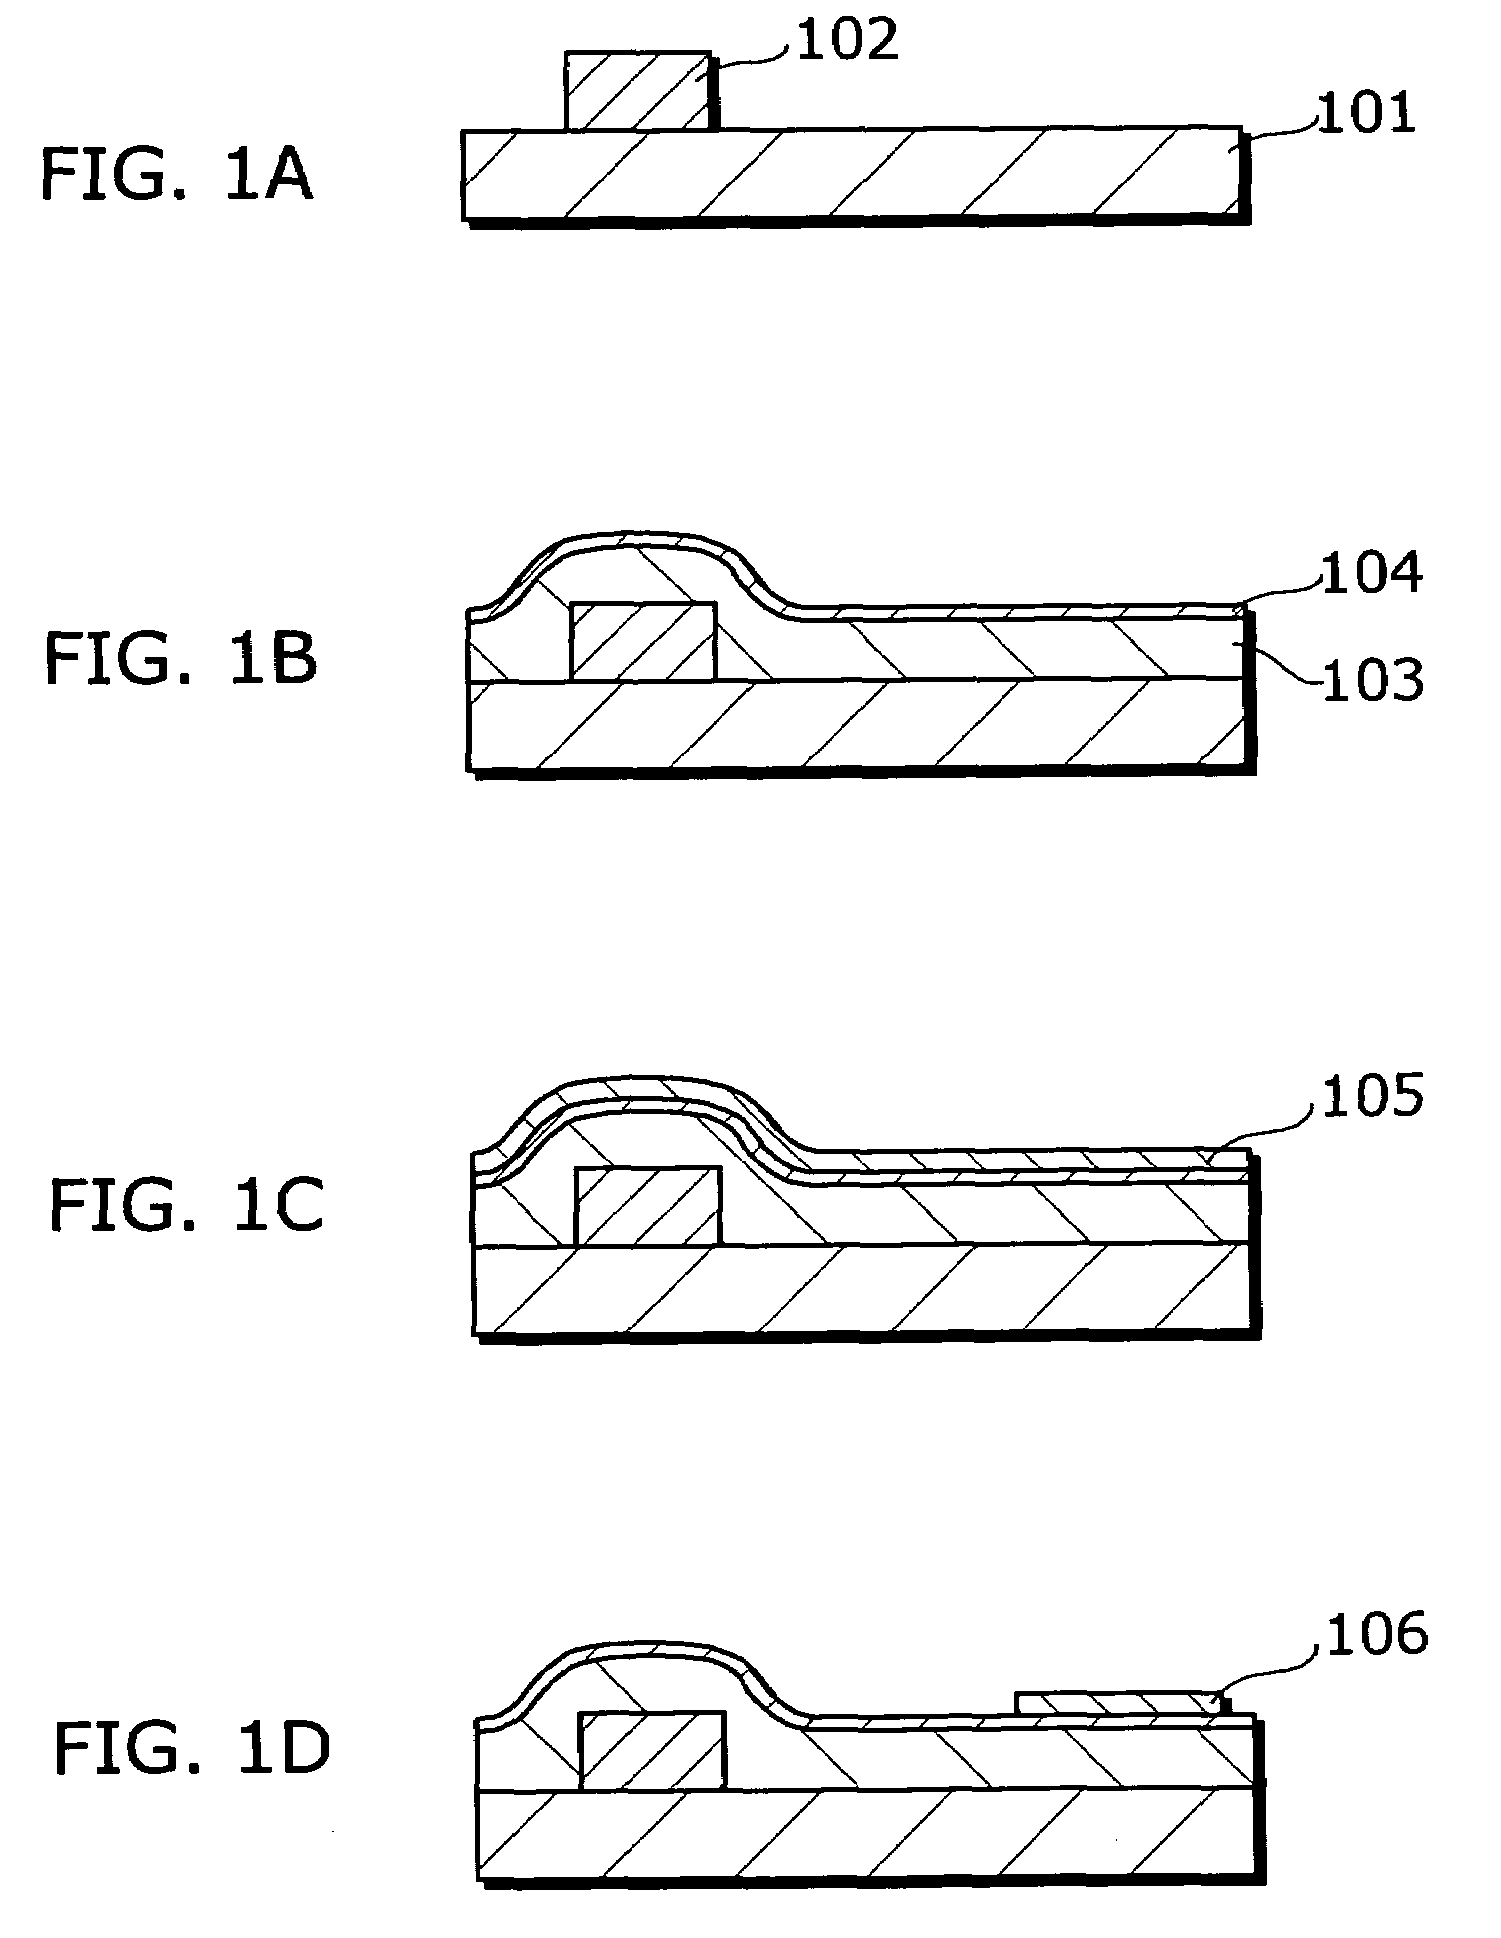 Film forming method for semiconductor device